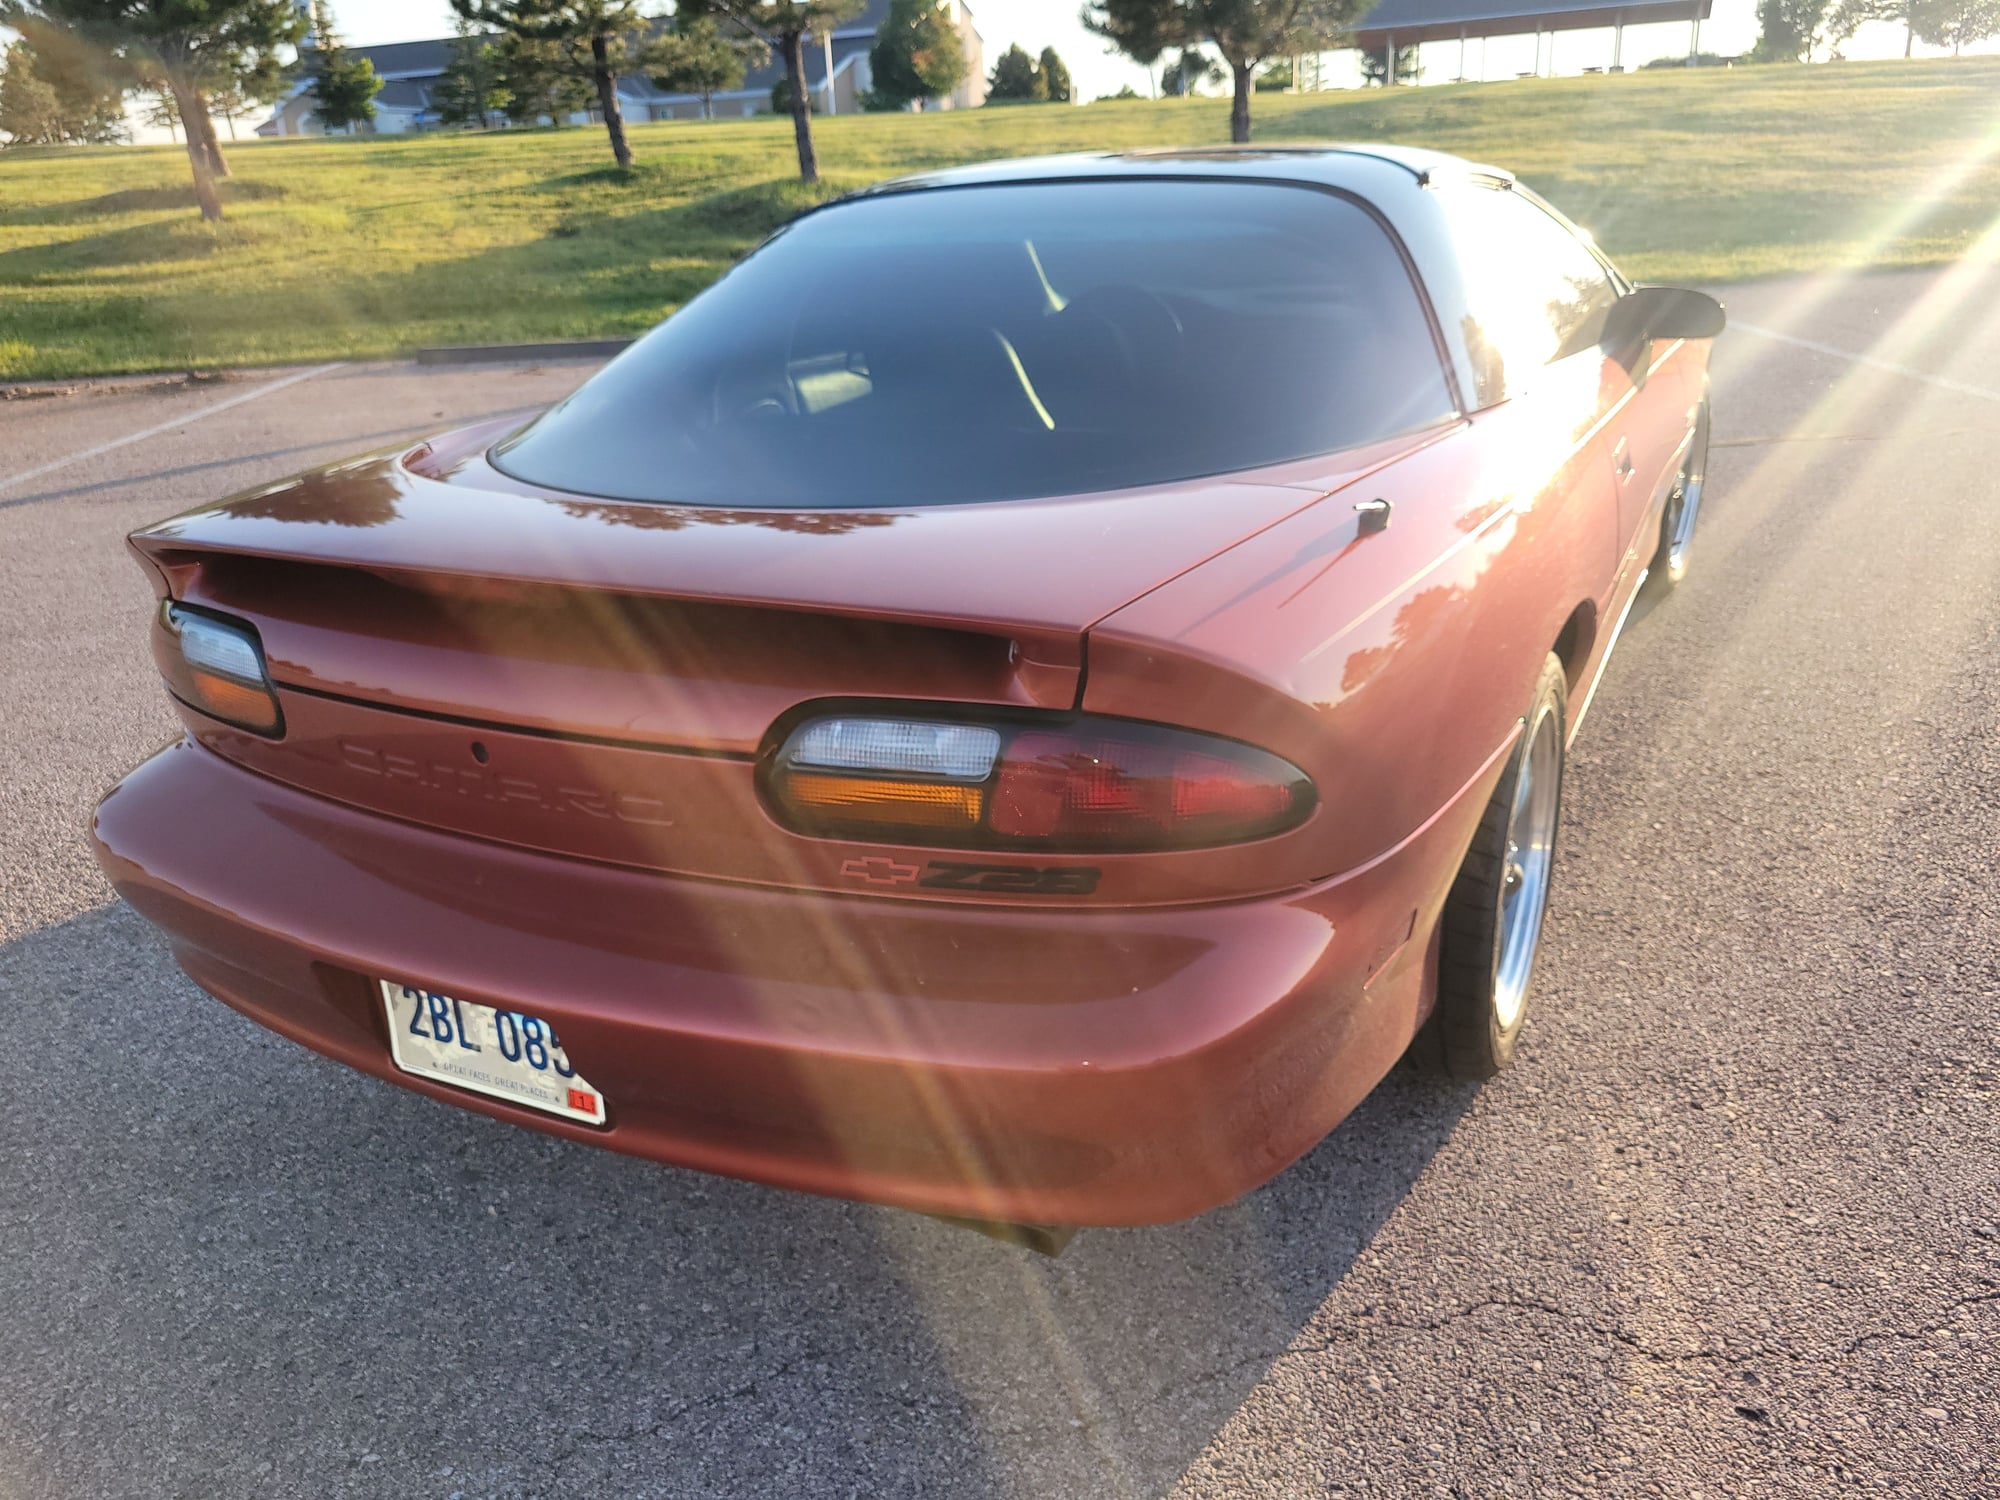 2002 Chevrolet Camaro - 2002 Z28 automatic t-tops - Used - Rapid City, SD 57701, United States